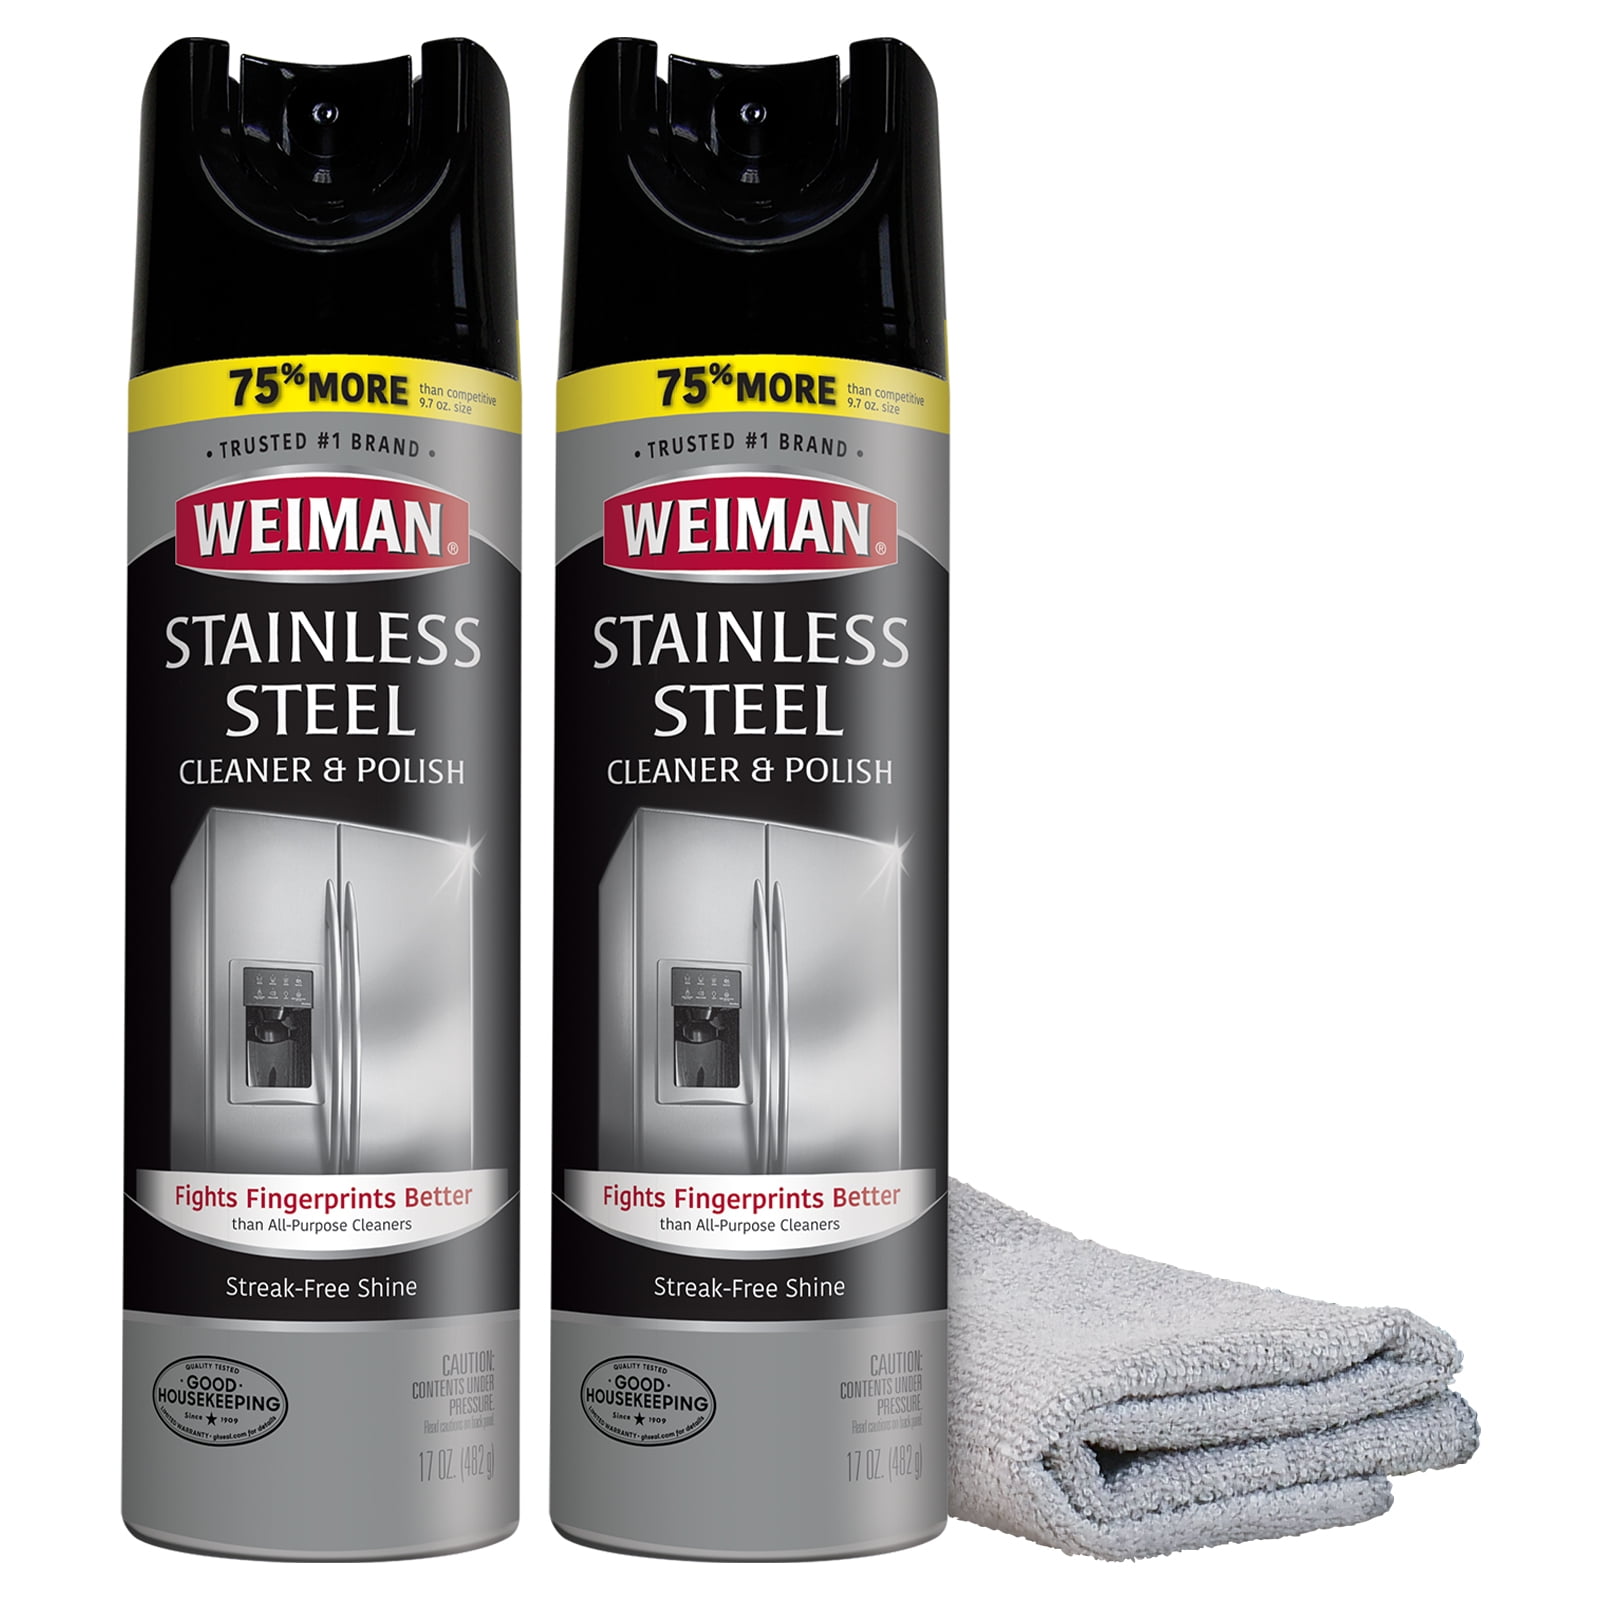 Weiman Stainless Steel Cleaner and Polish - 22 Ounce 6 Pack - Protects  Appliances from Fingerprints and Leaves a Streak-Free Shine for  Refrigerator Dishwasher Oven Grill etc